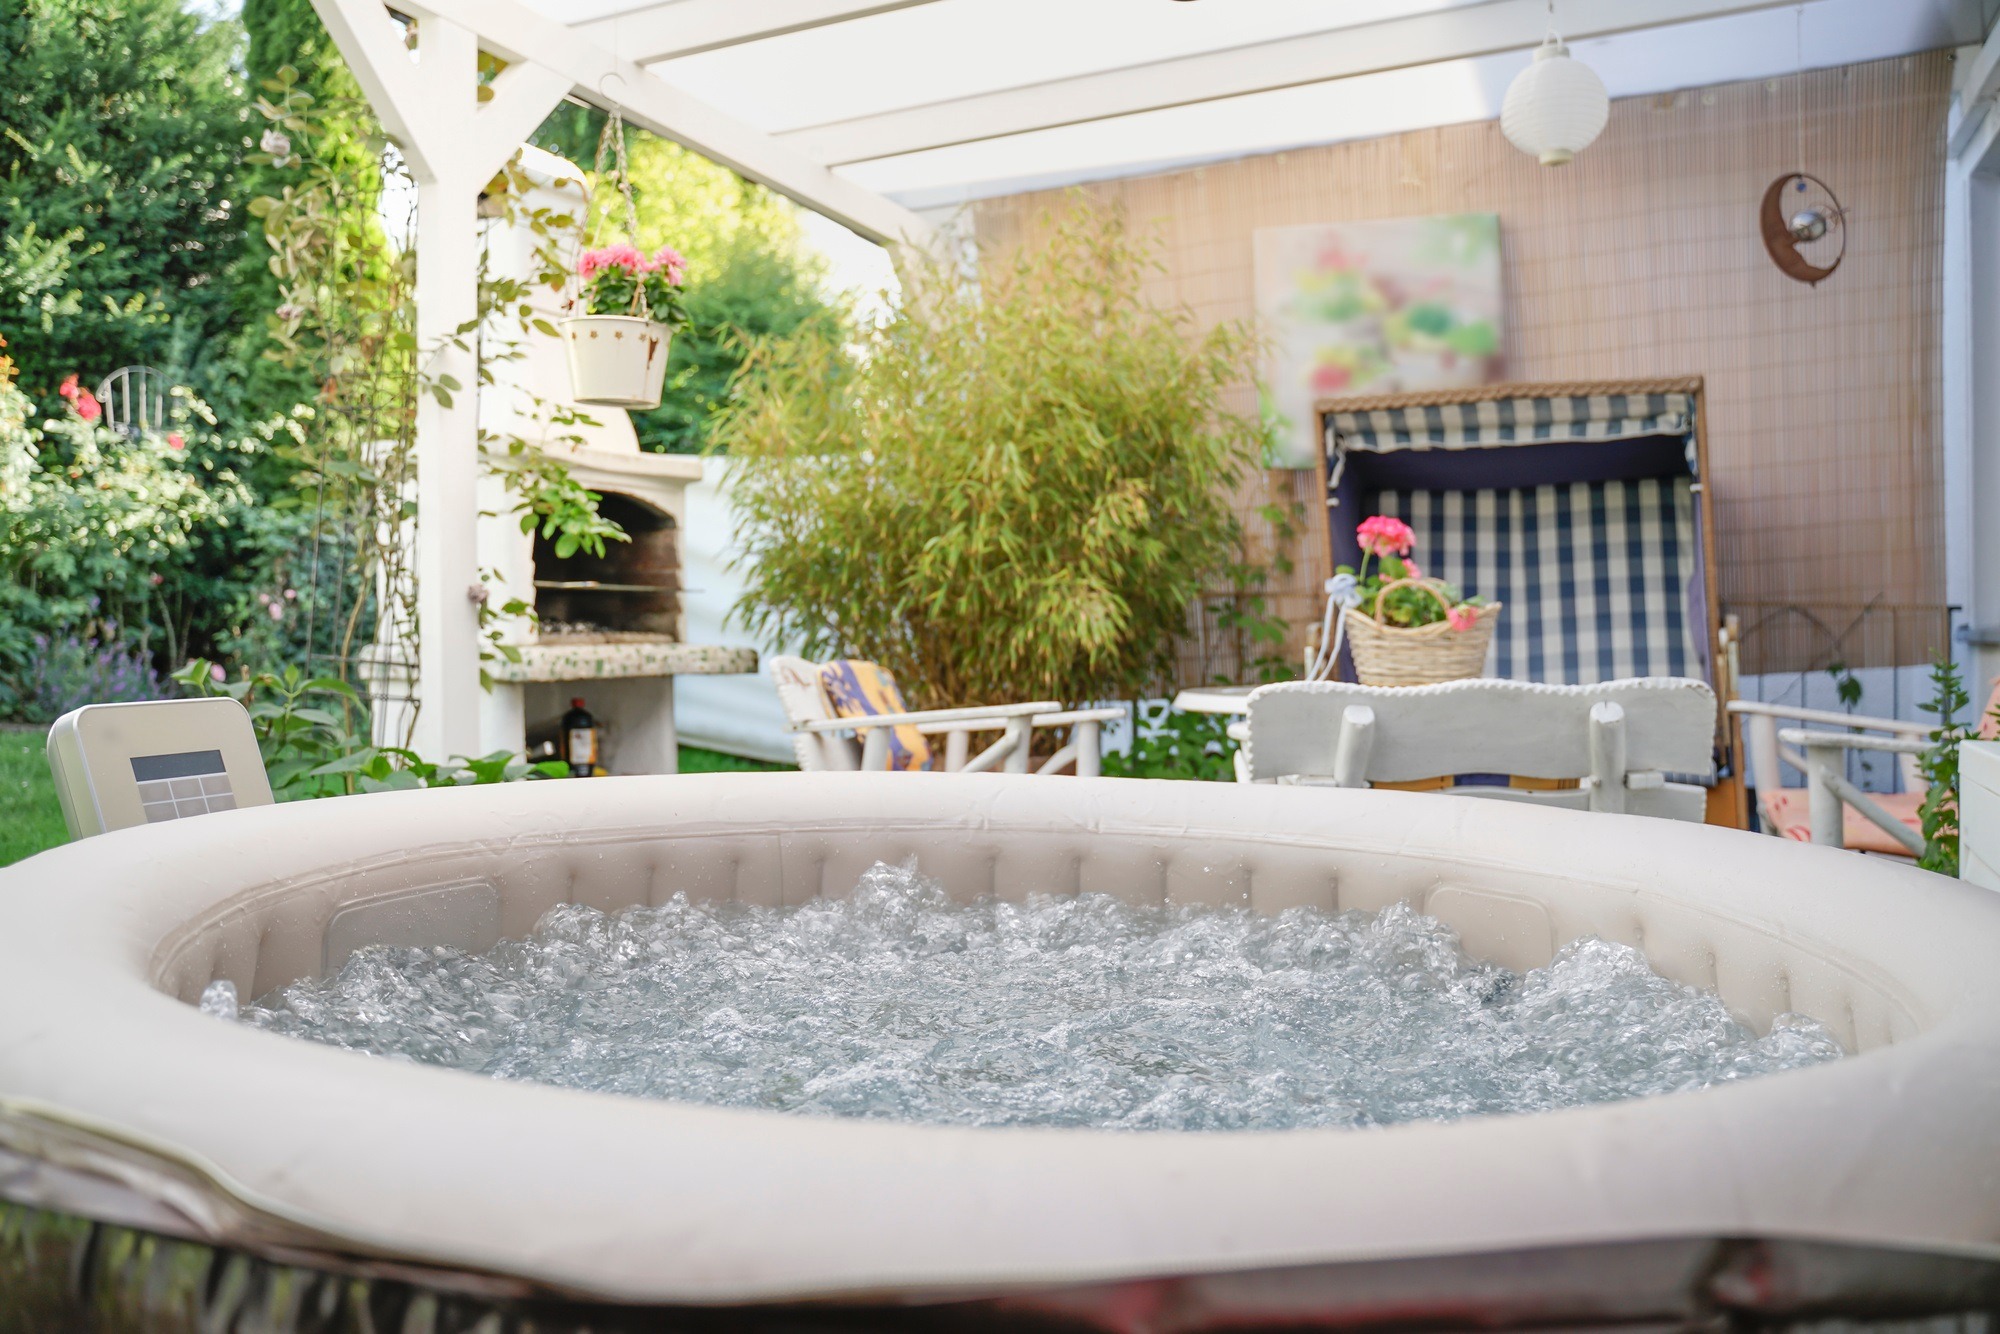 9 Reasons To Soak in a Hot Tub Jacuzzi at Least Once a Week